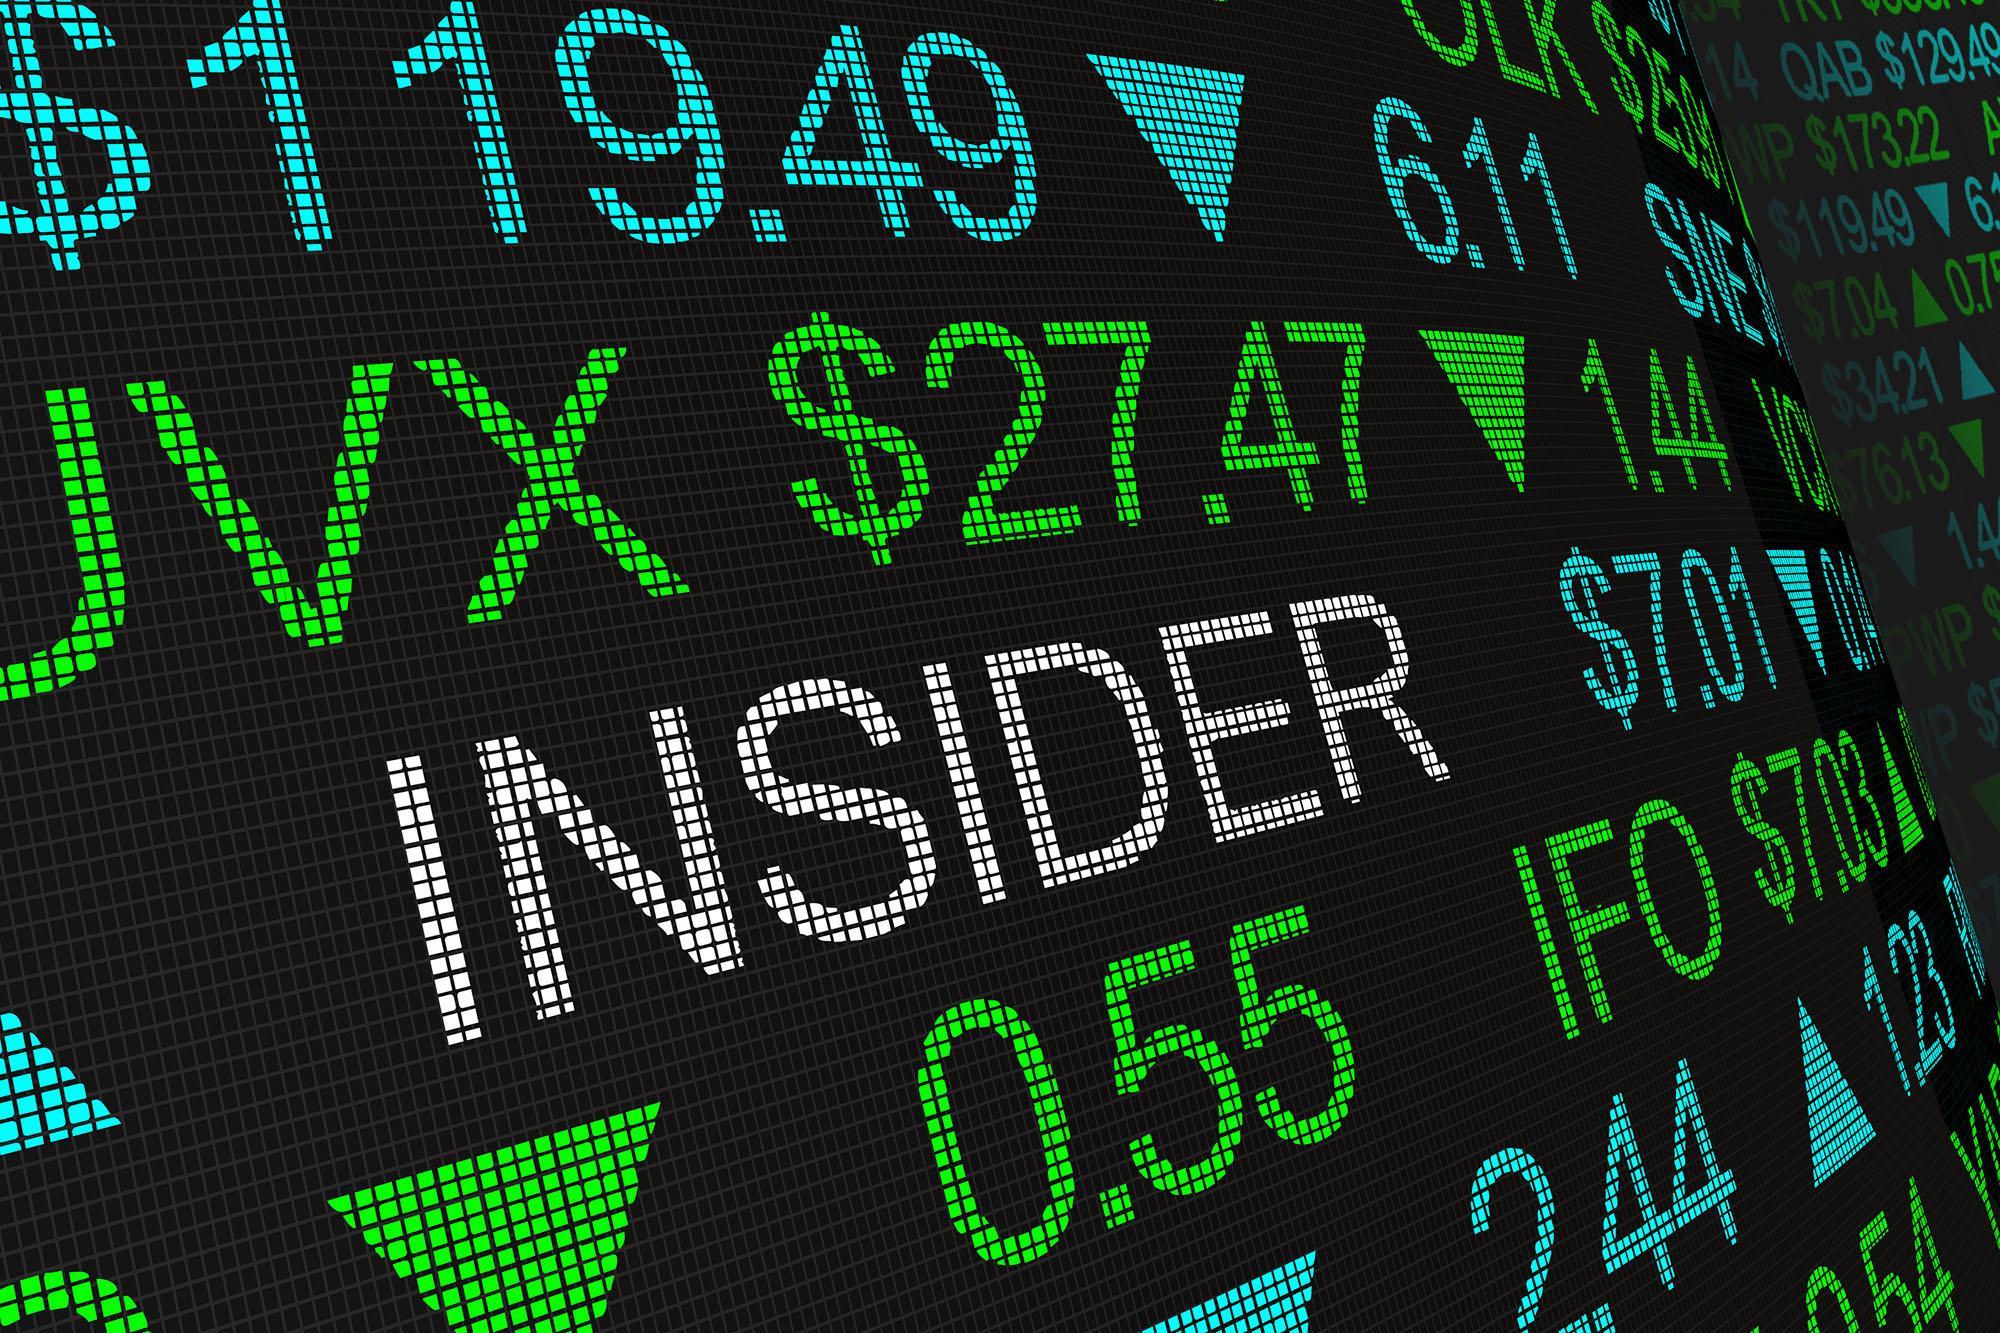 How to comply with insider trading regulations - iPleaders